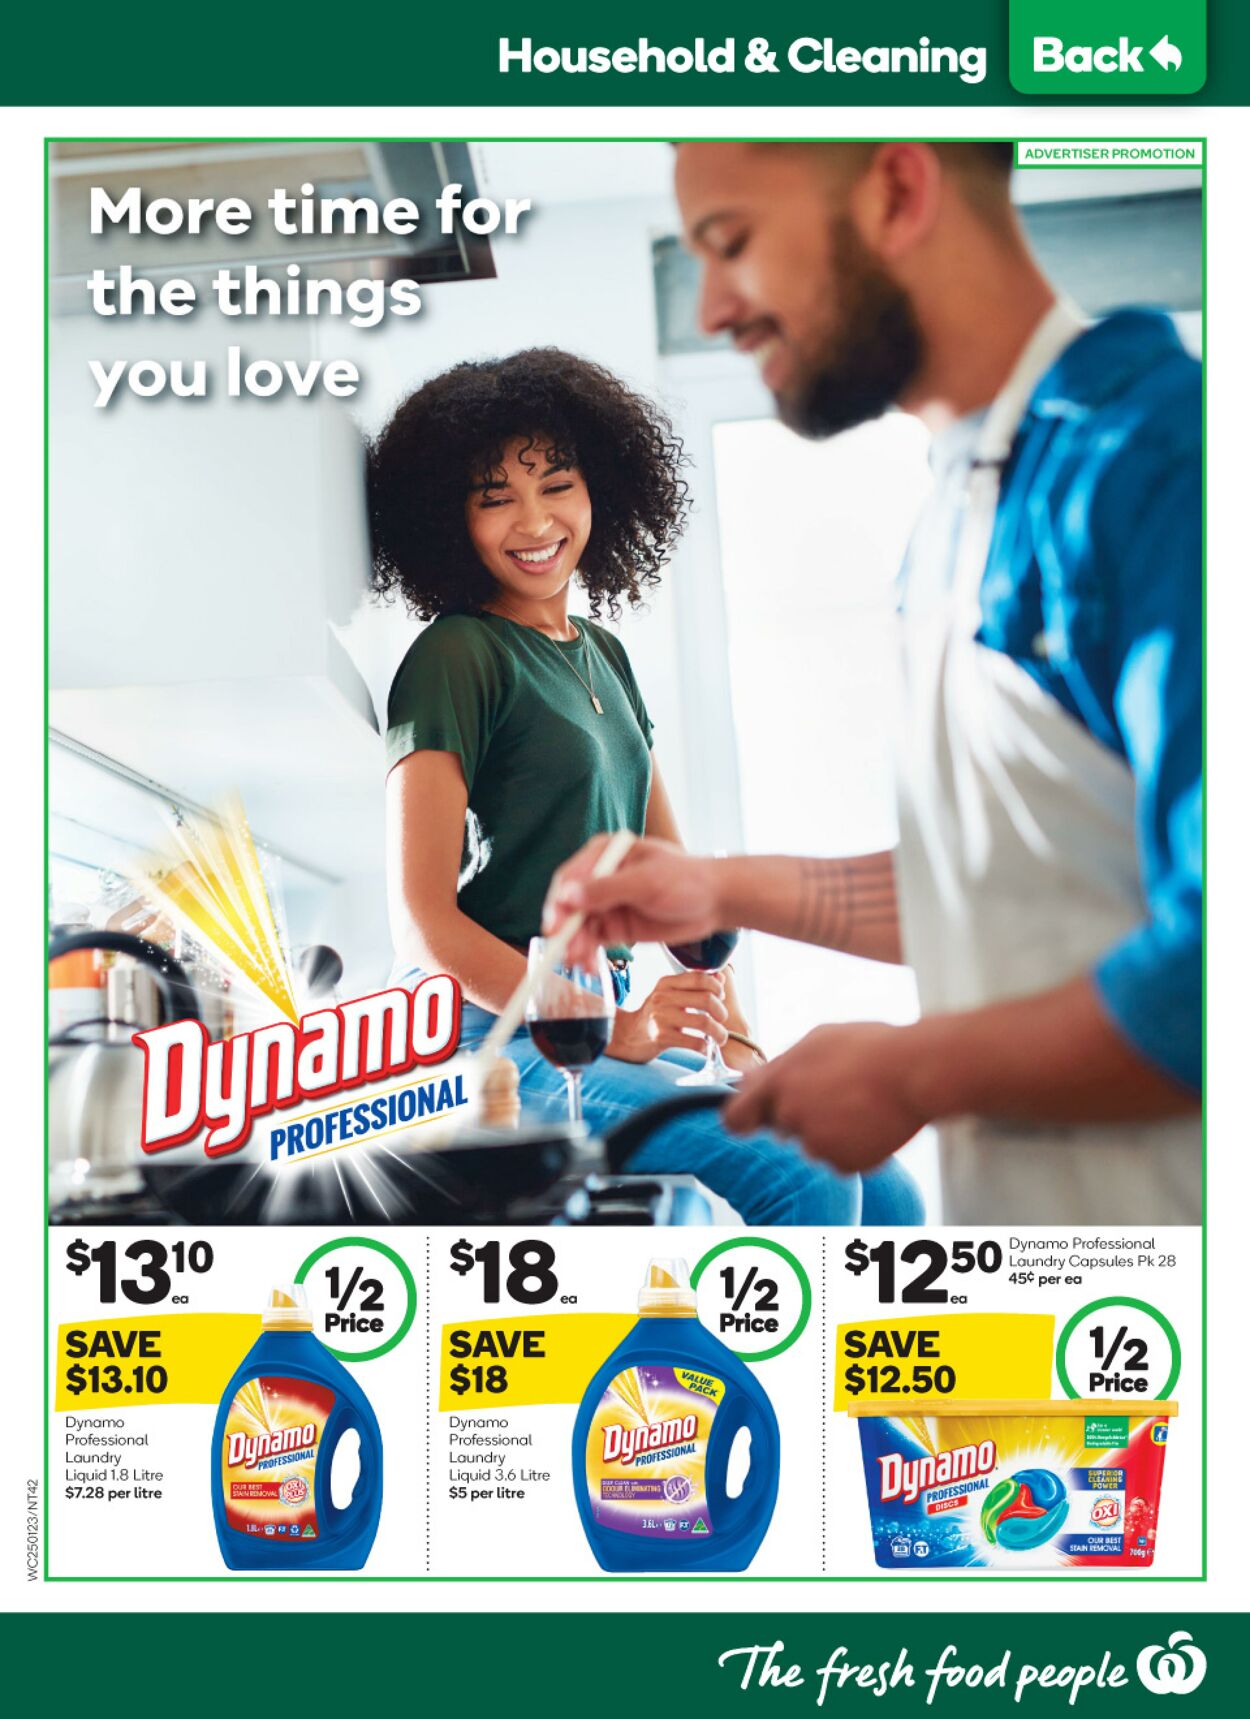 Catalogue Woolworths 25.01.2023 - 31.01.2023